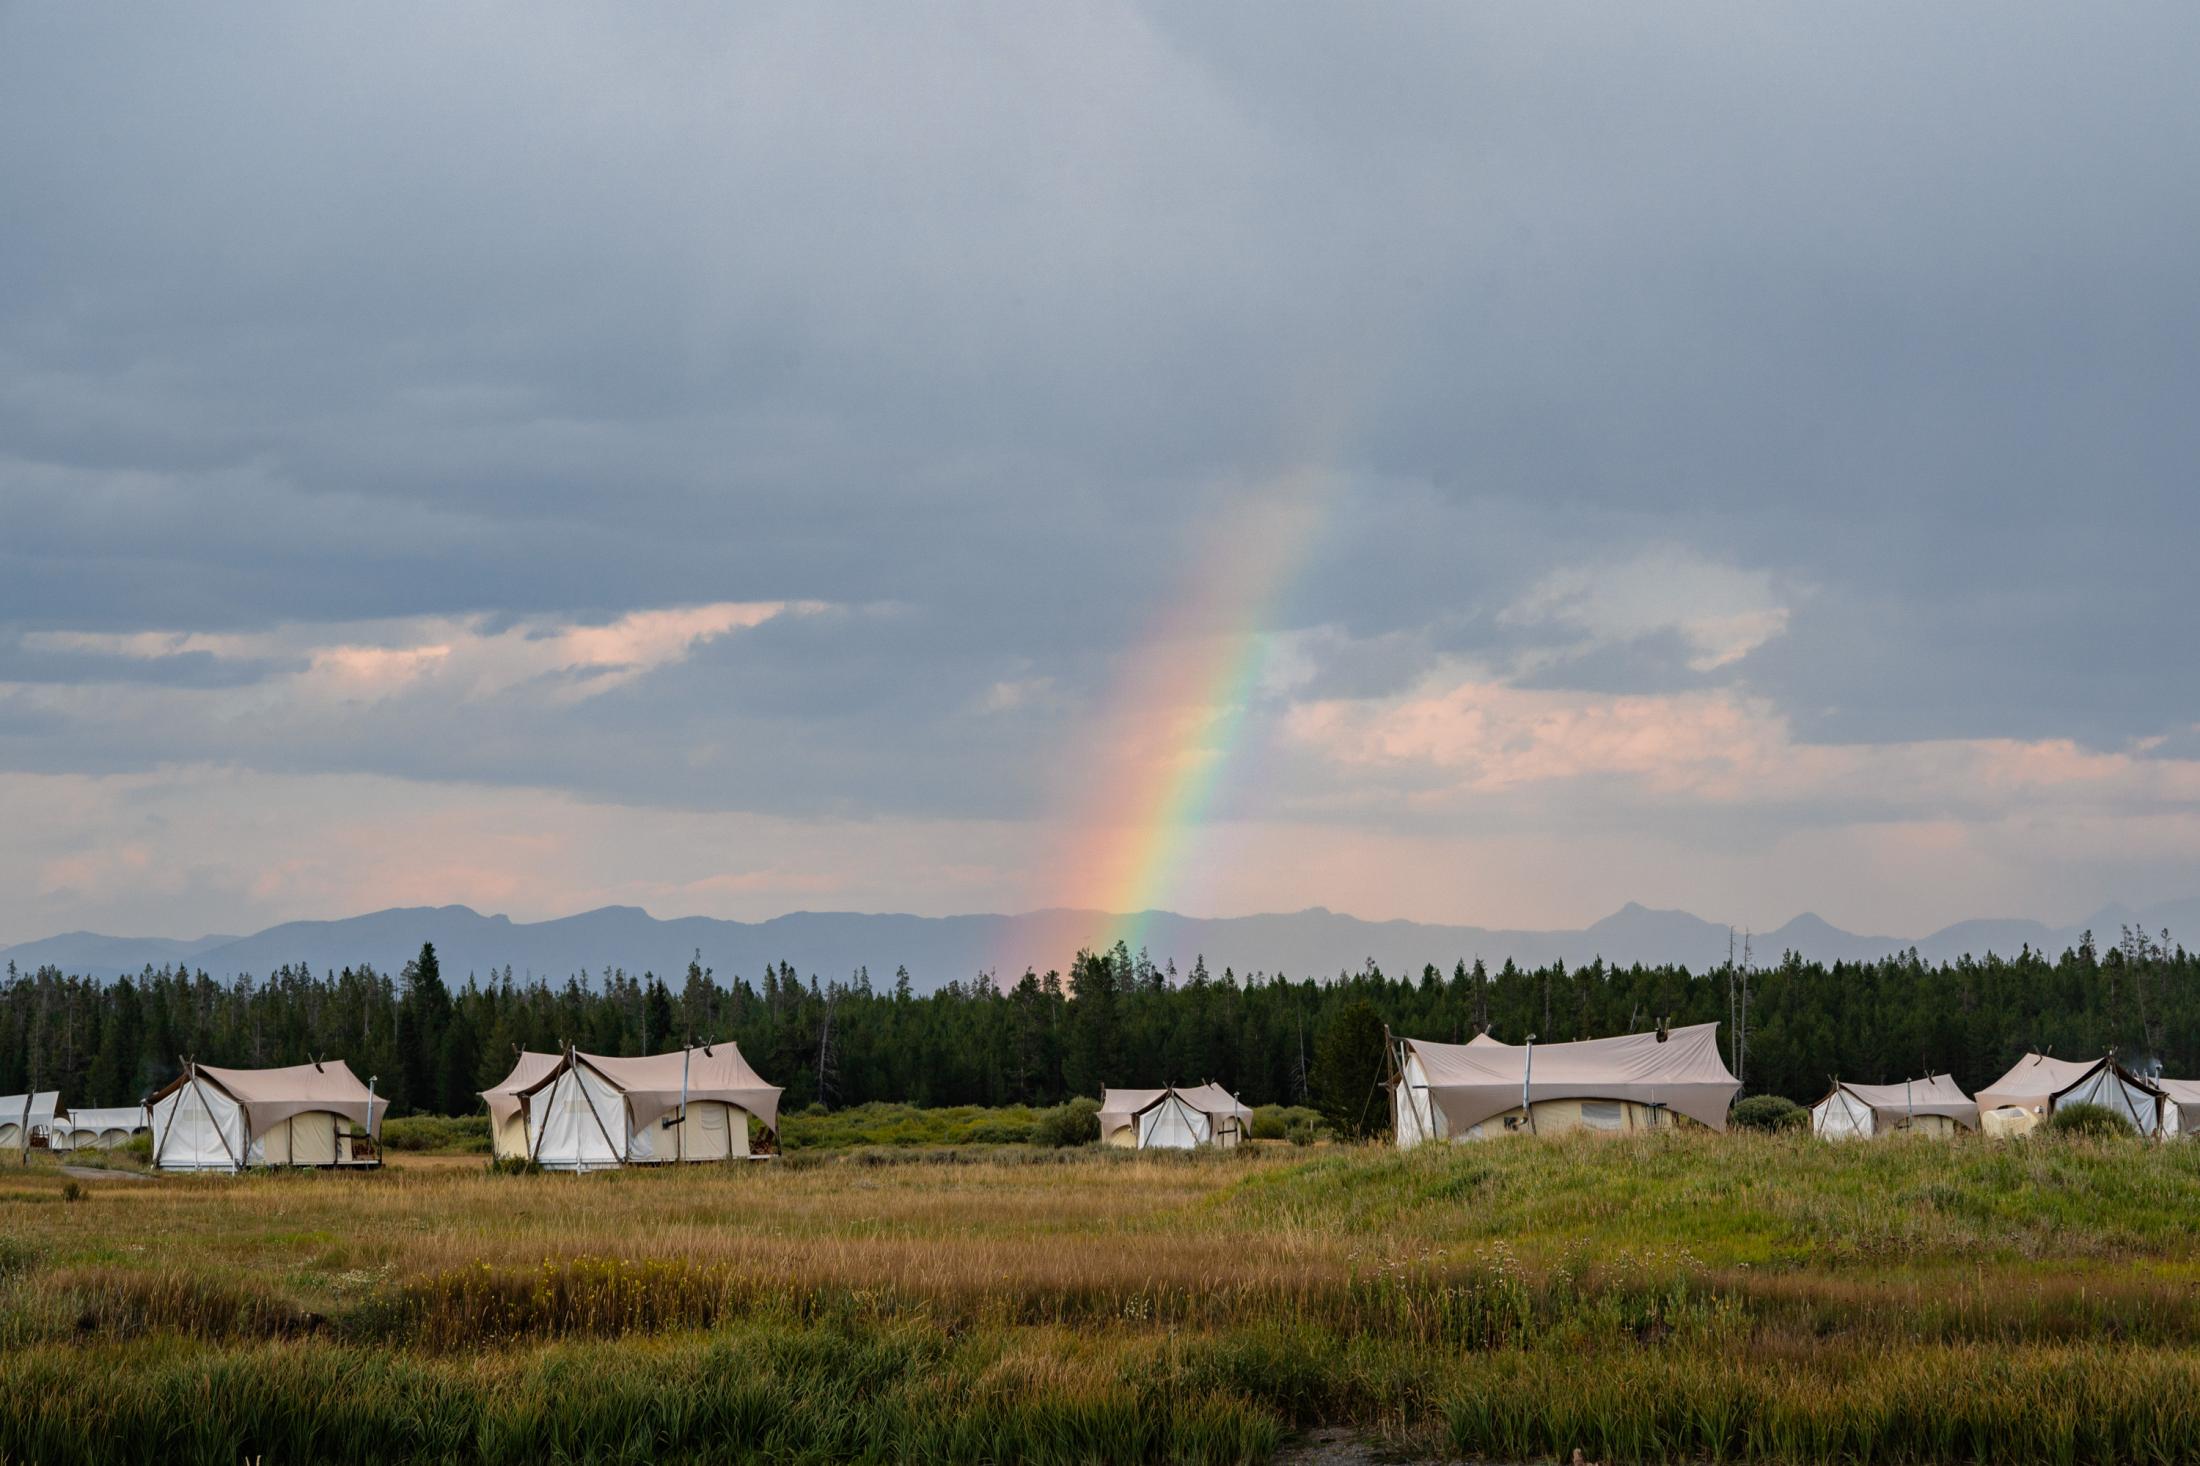 At Yellowstone National Park, I got to experience glamping for the first time. No WiFi, no shower in the tent, no heater. I was only able to warm myself with fire in the stove, but it was the best way to enjoy nature. At our glamping site, I see a rainbow casting in the forests.